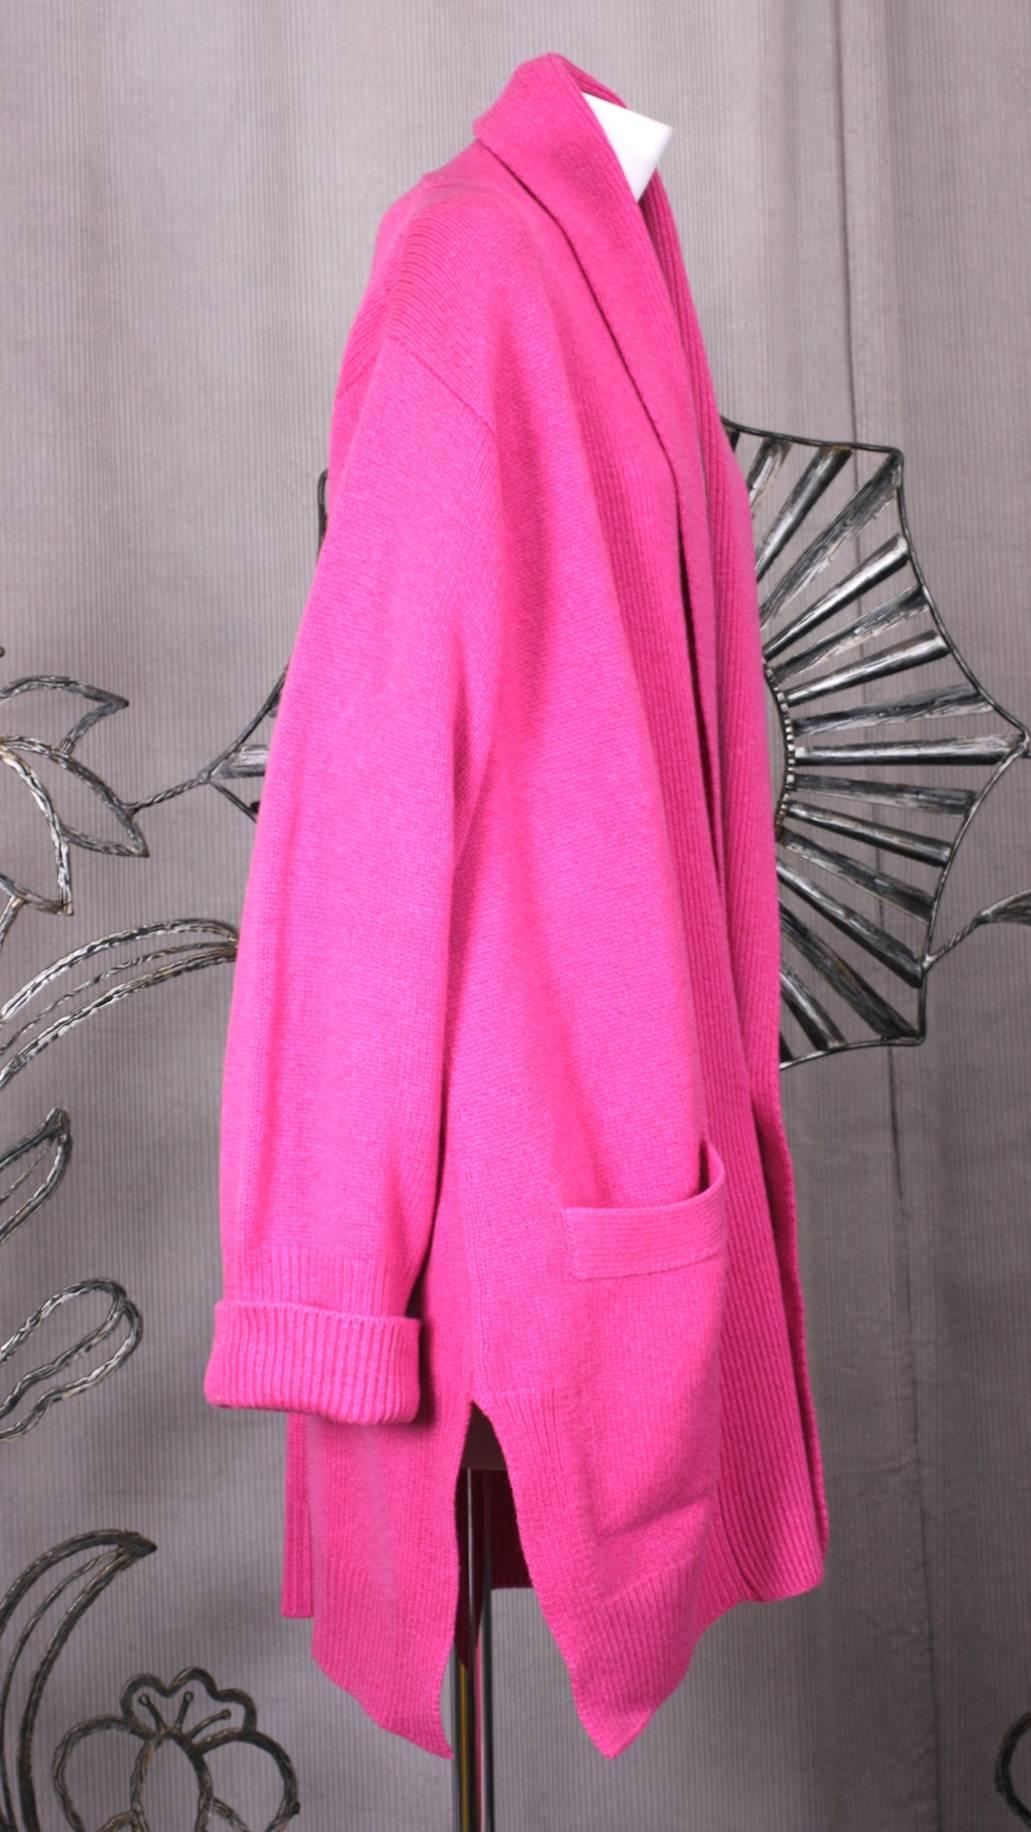 Luxurious Scottish Cashmere Oversized Cardigan by Hawick, Scotland in rasberry pink. XL large size allows for wrapping and belting with slashed side seams. Ribbed trim forms shawl collar. Excellent condition. 